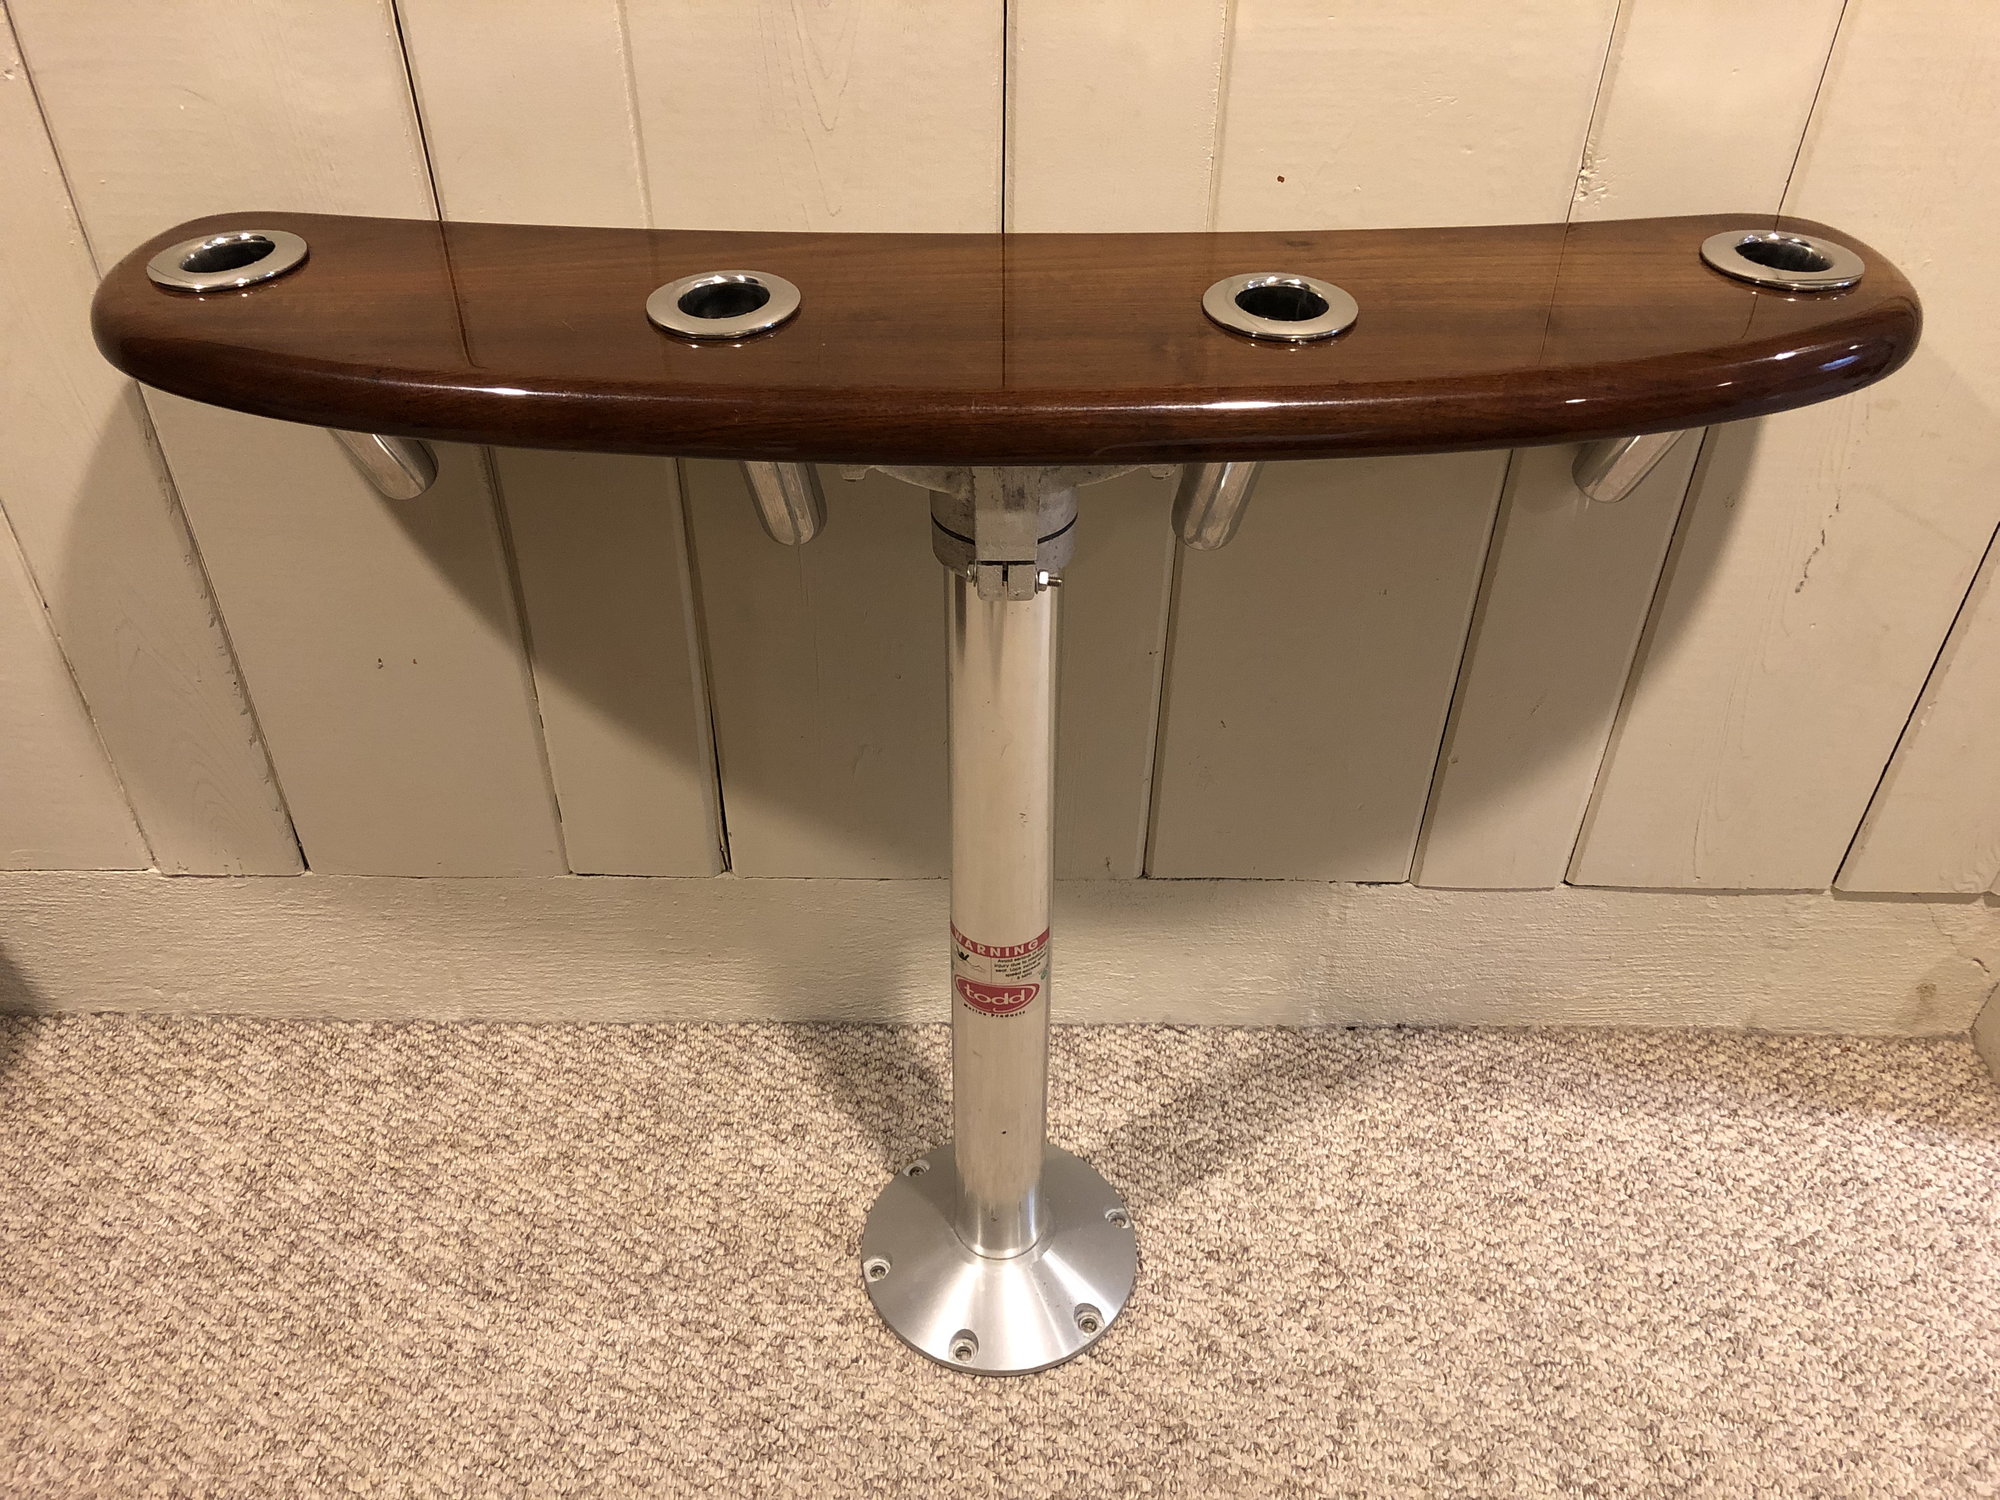 Teak Rocket Launcher Rod Holder - The Hull Truth - Boating and